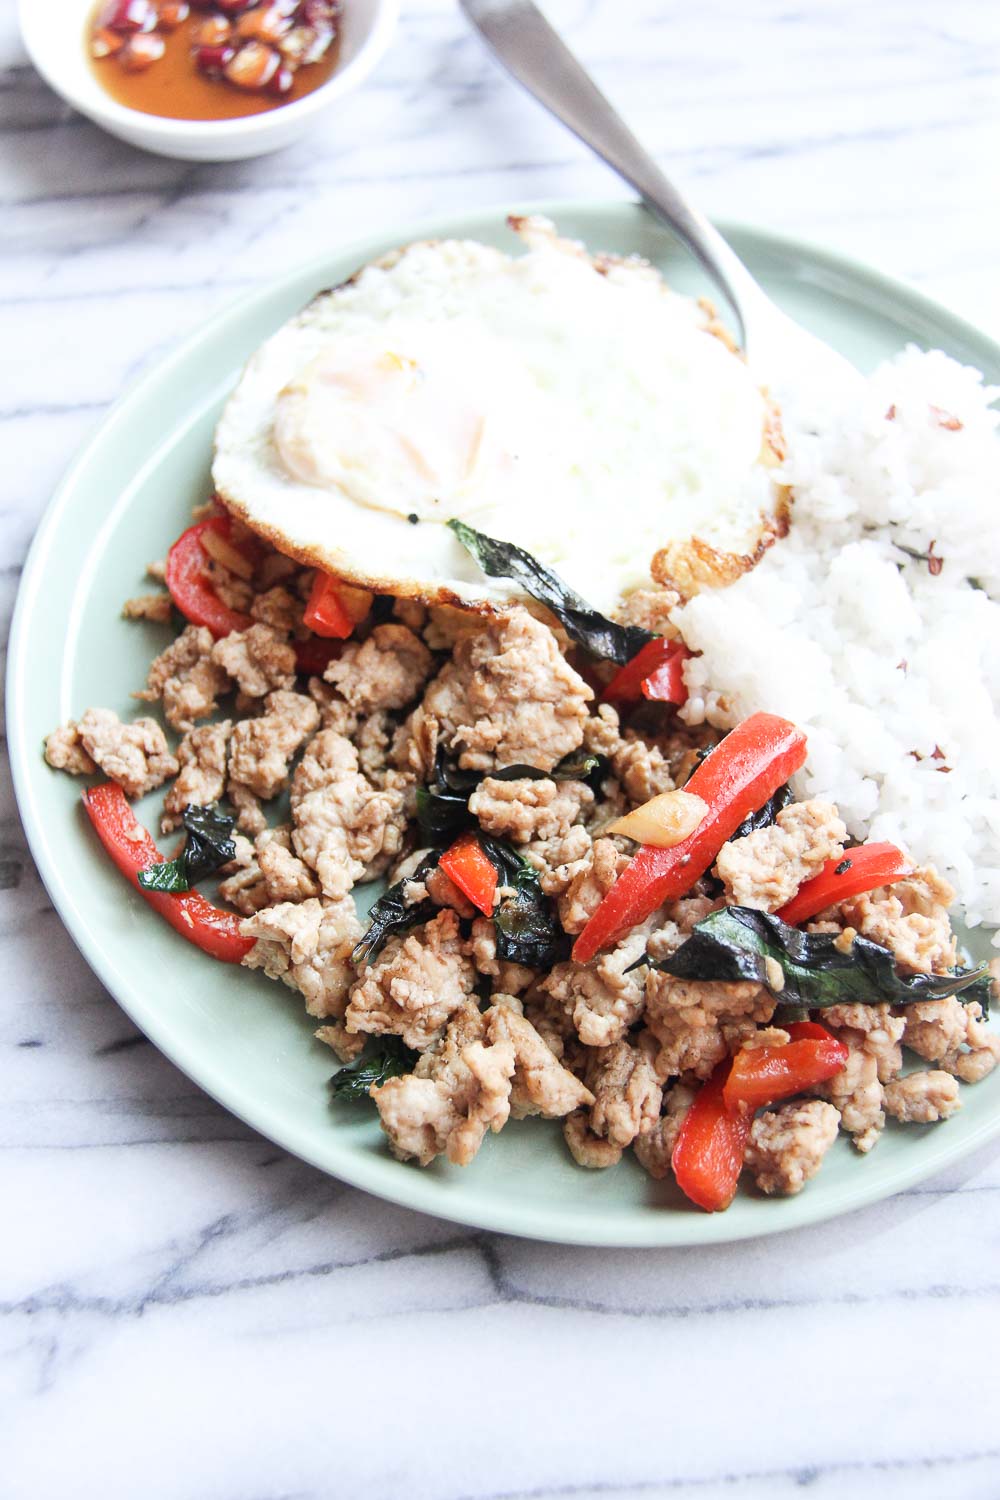 This quick & easy Thai Basil Chicken is budget friendly, light and full of flavor - all blend in a perfect flavor combination. Great for busy weekday meals and can be done in less than 20 minutes.